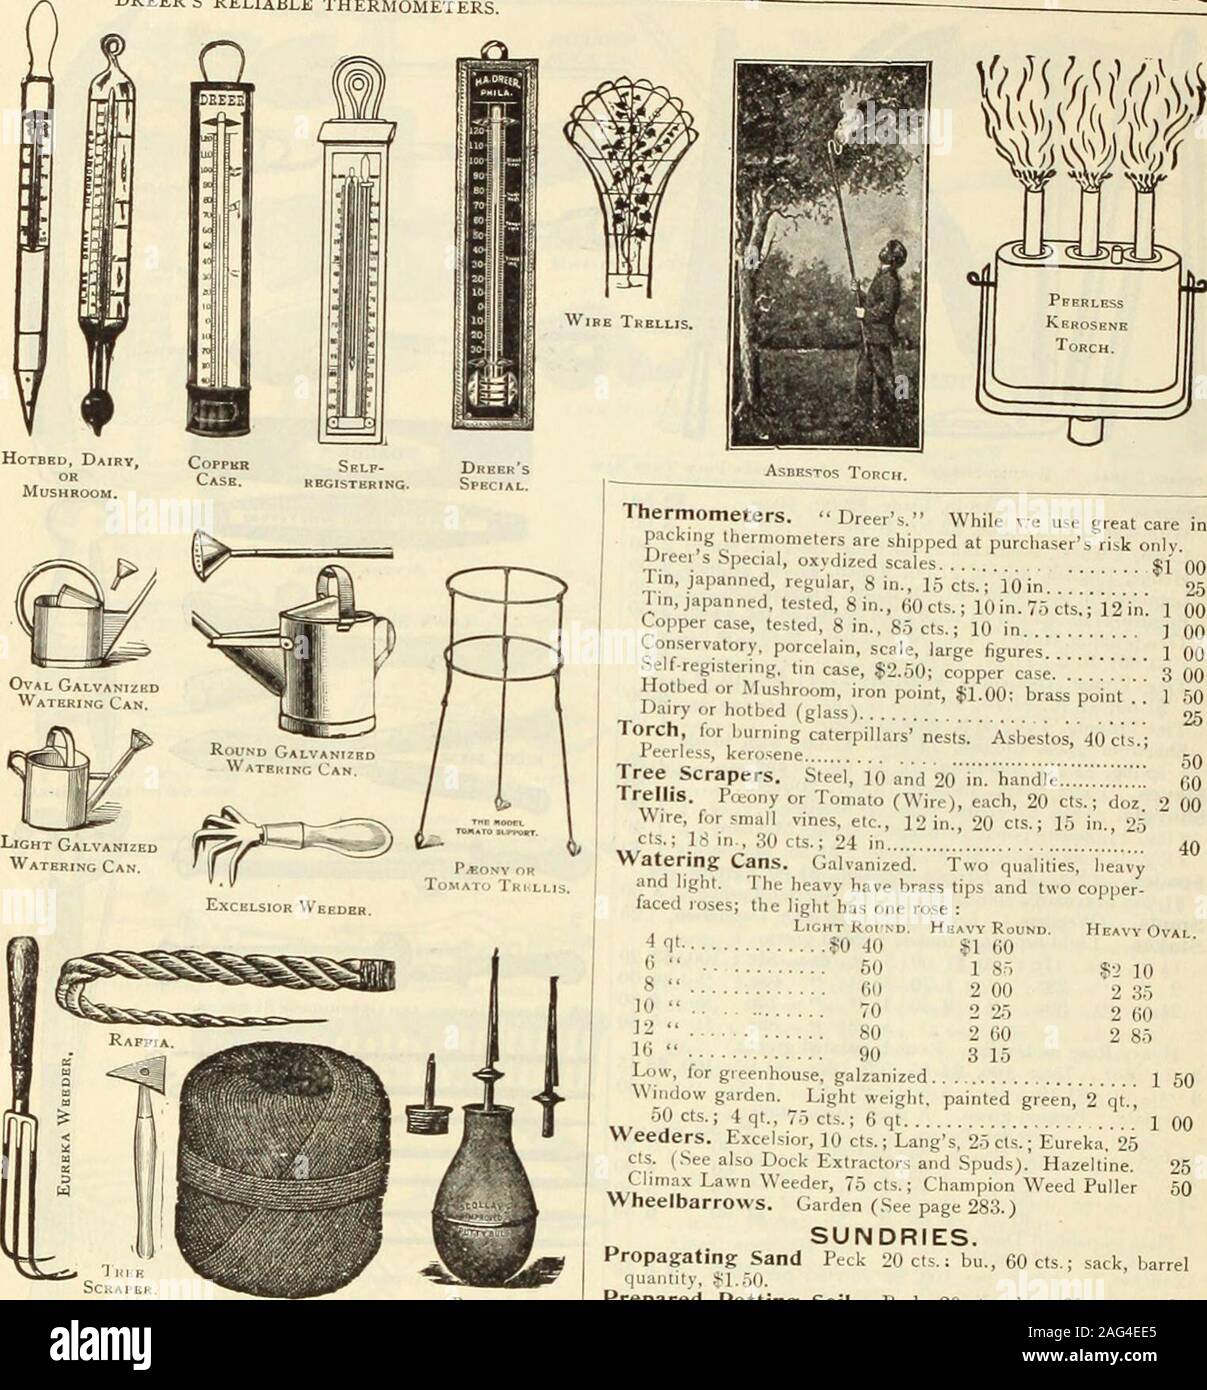 . Dreer's 1913 garden book. DREERS RELIABLE THERMOMETERS.. Dreers. While ve use great care inpacking thermometers are shipped at purchasers risk only I »reei s Special, oxydized scales $1 00 Tin, japanned, regular, 8 in., 15 cts.; 10 in 05 J, japanned, tested, 8 in., 60cts.; lOin. 7.&gt; cts.; 12in. 1 Copper case, tested, 8 in., 85 cts.; 10 in ) Conservatory, porcelain, scale, large figures. 1 Sell registering, tin case, $2.50; copper case.! 3 Hotbed or Mushroom, iron point, $1.00; brass point 1 1 Jairy or hotbed (glass) Torch, for burning caterpillars nests. Asbestos, 40cts.;i eerless, kerose Stock Photo